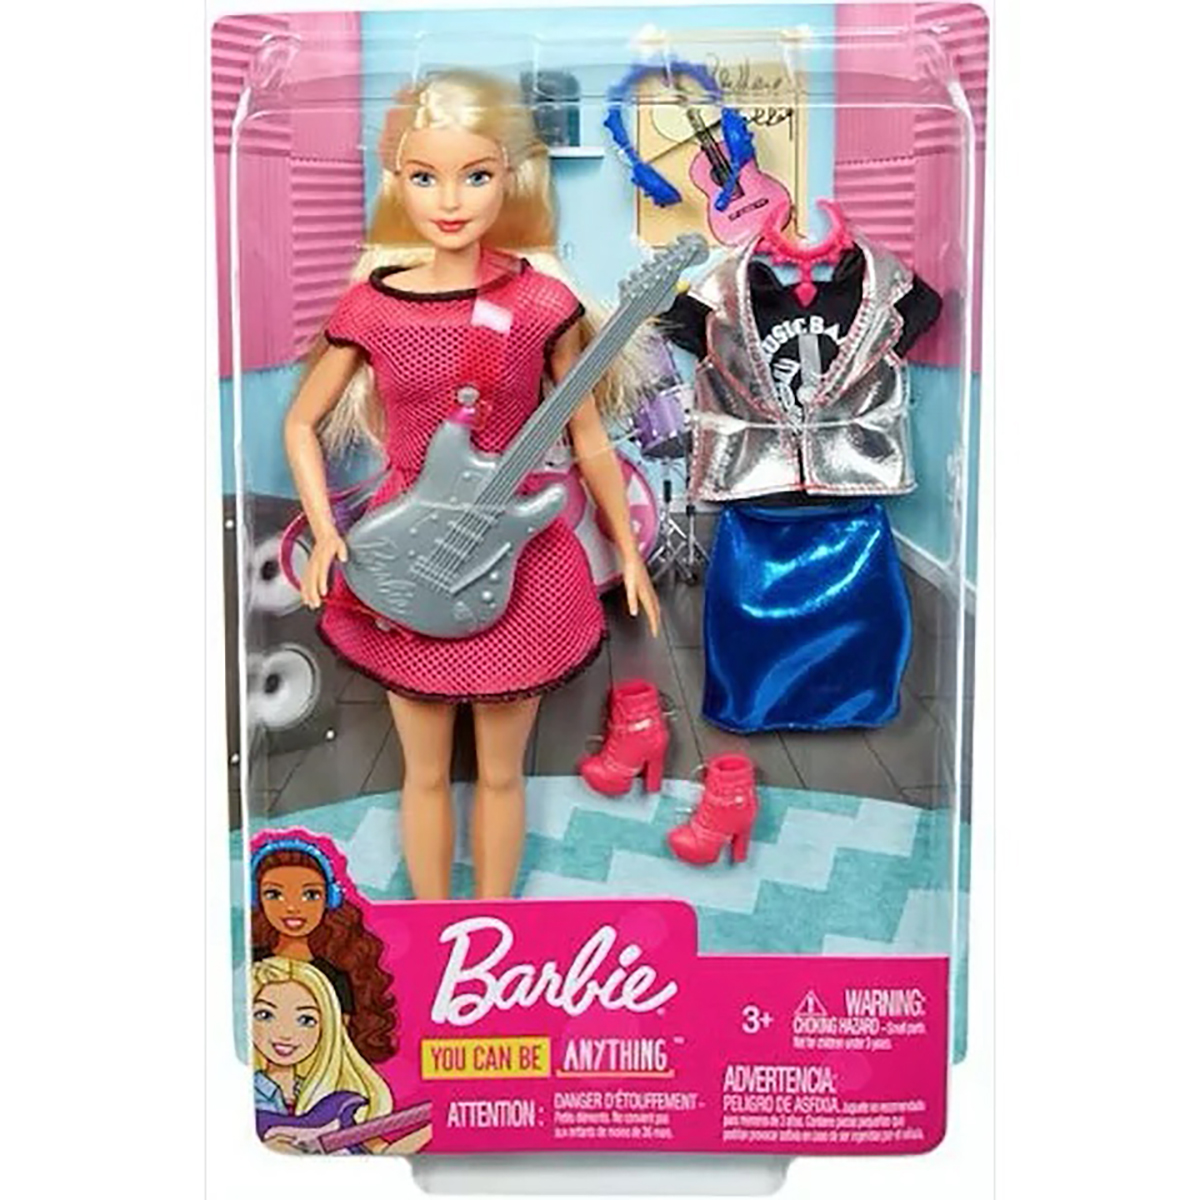 Barbie(R) You Can Be Anything Musician Careers Doll